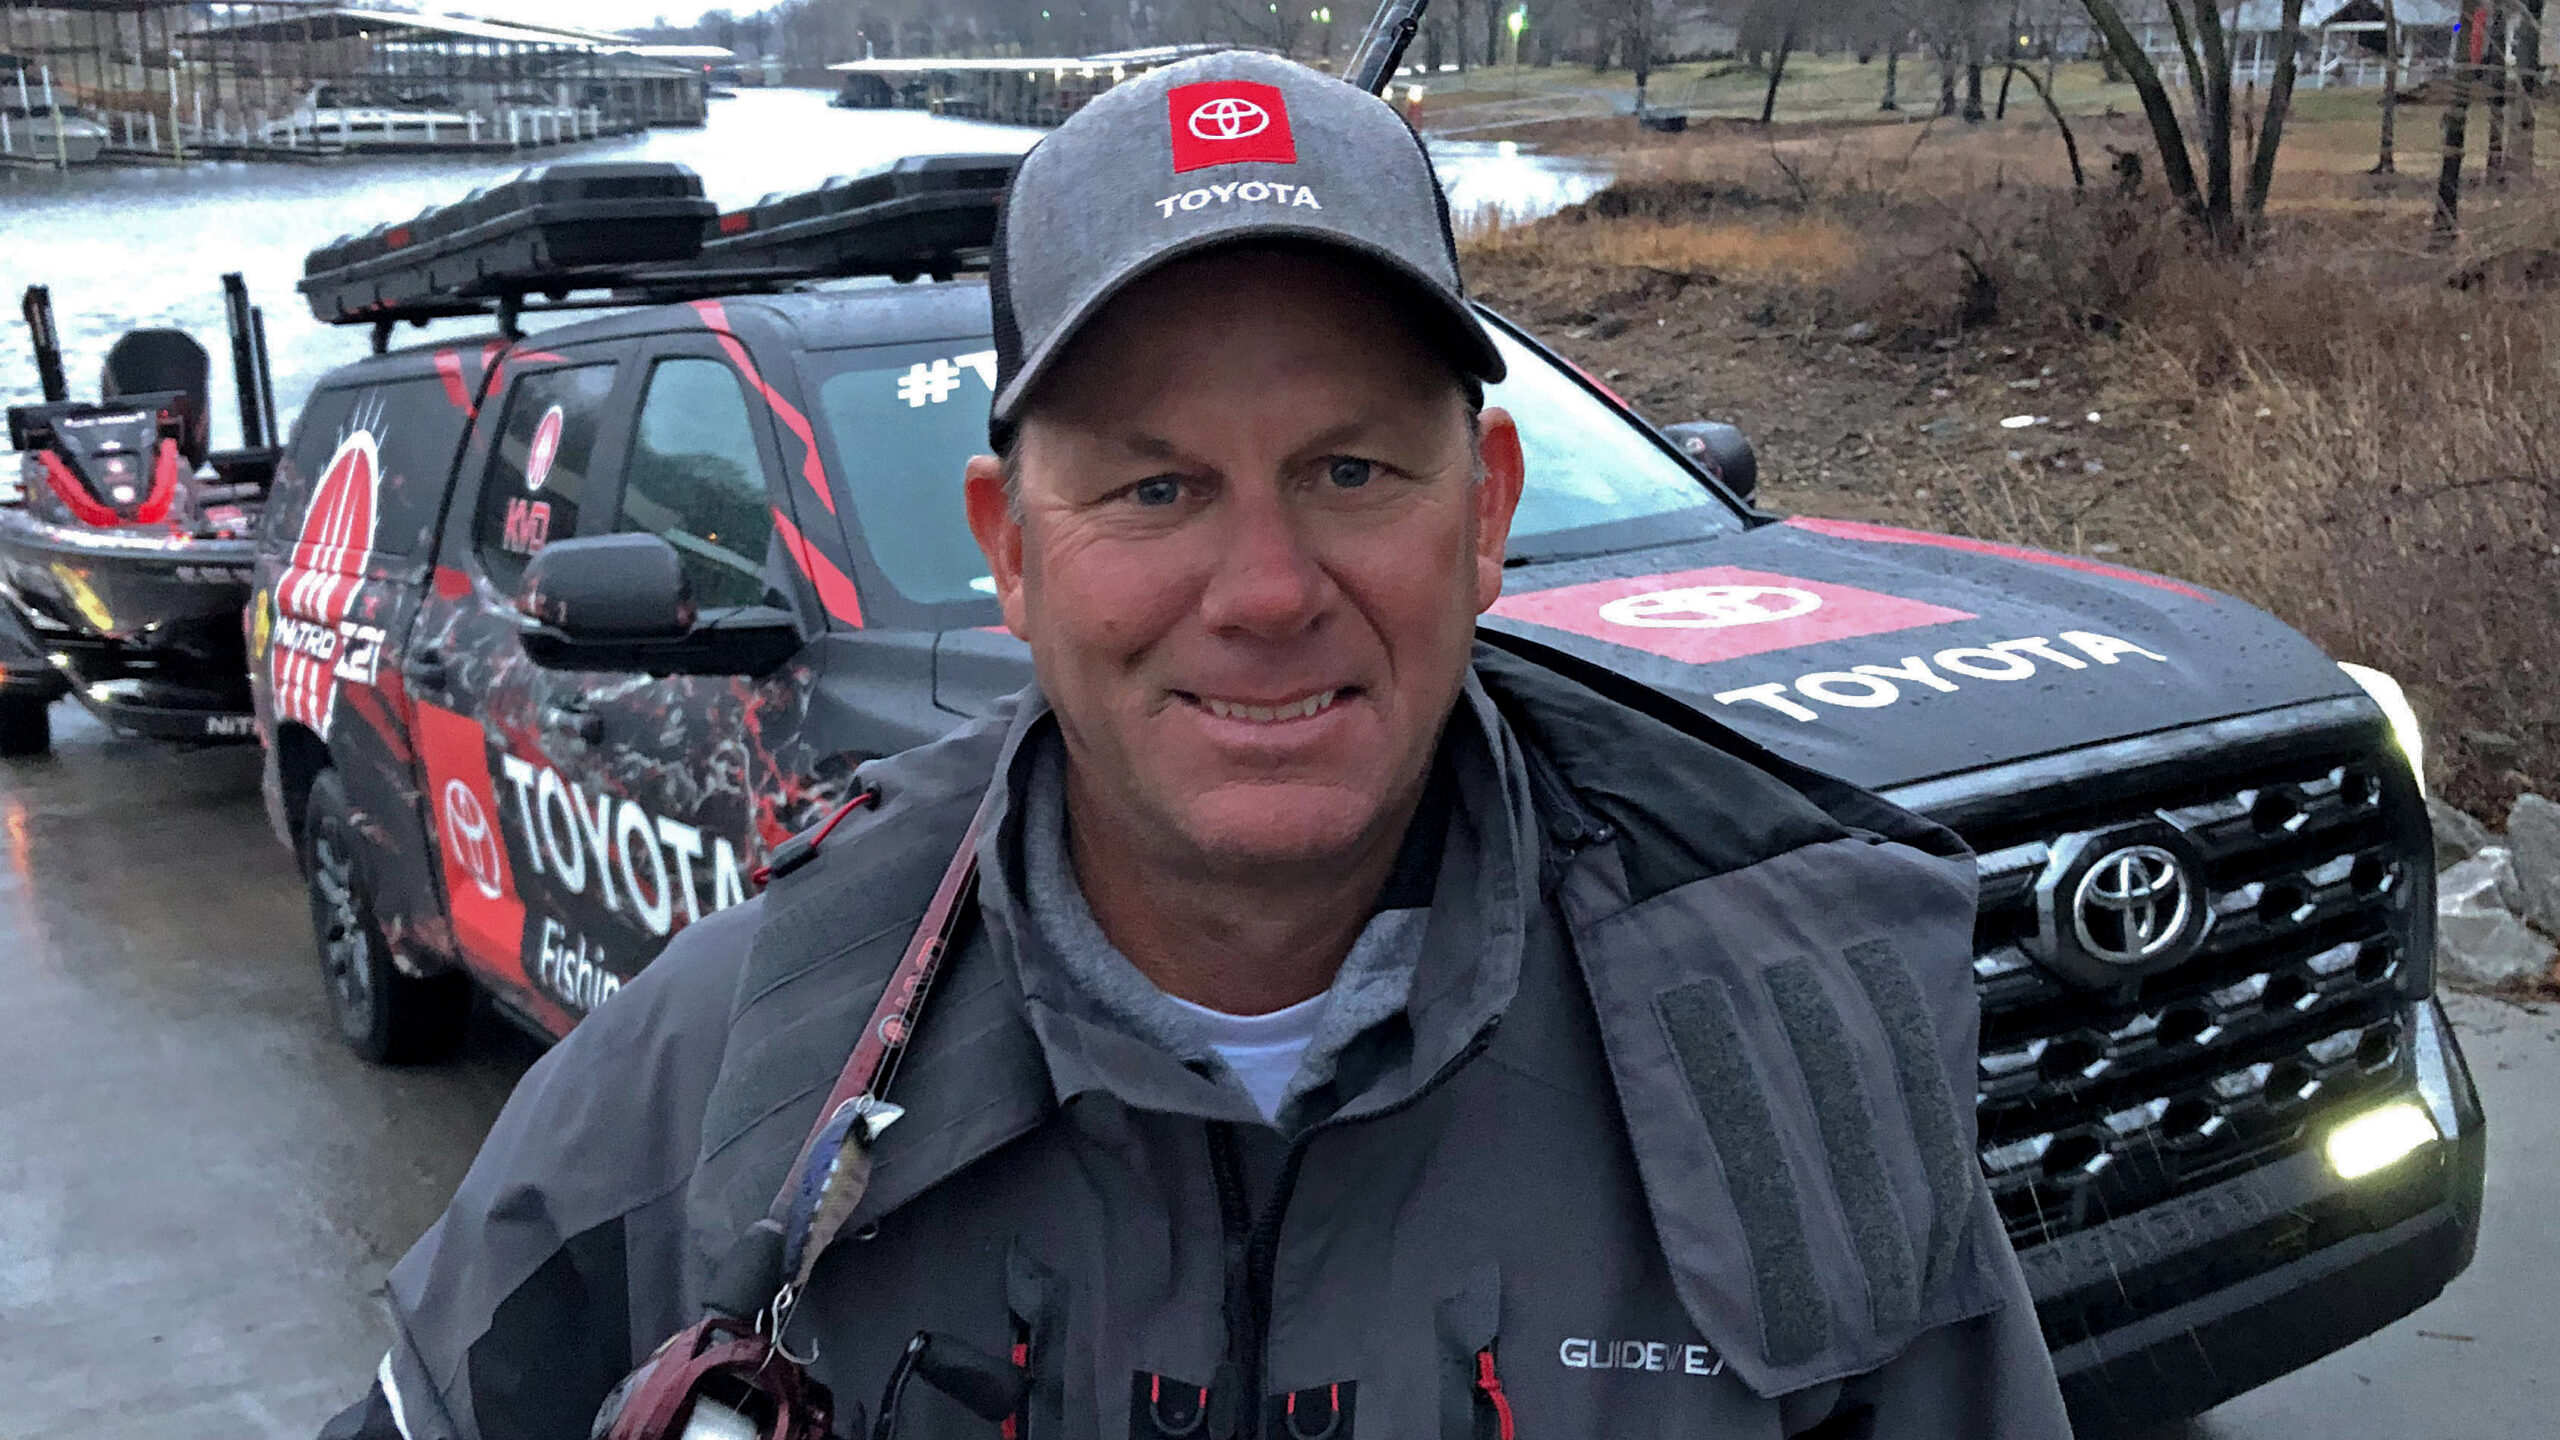 Kevin VanDam at REDCREST: Gracious and Giving in Defeat - Major